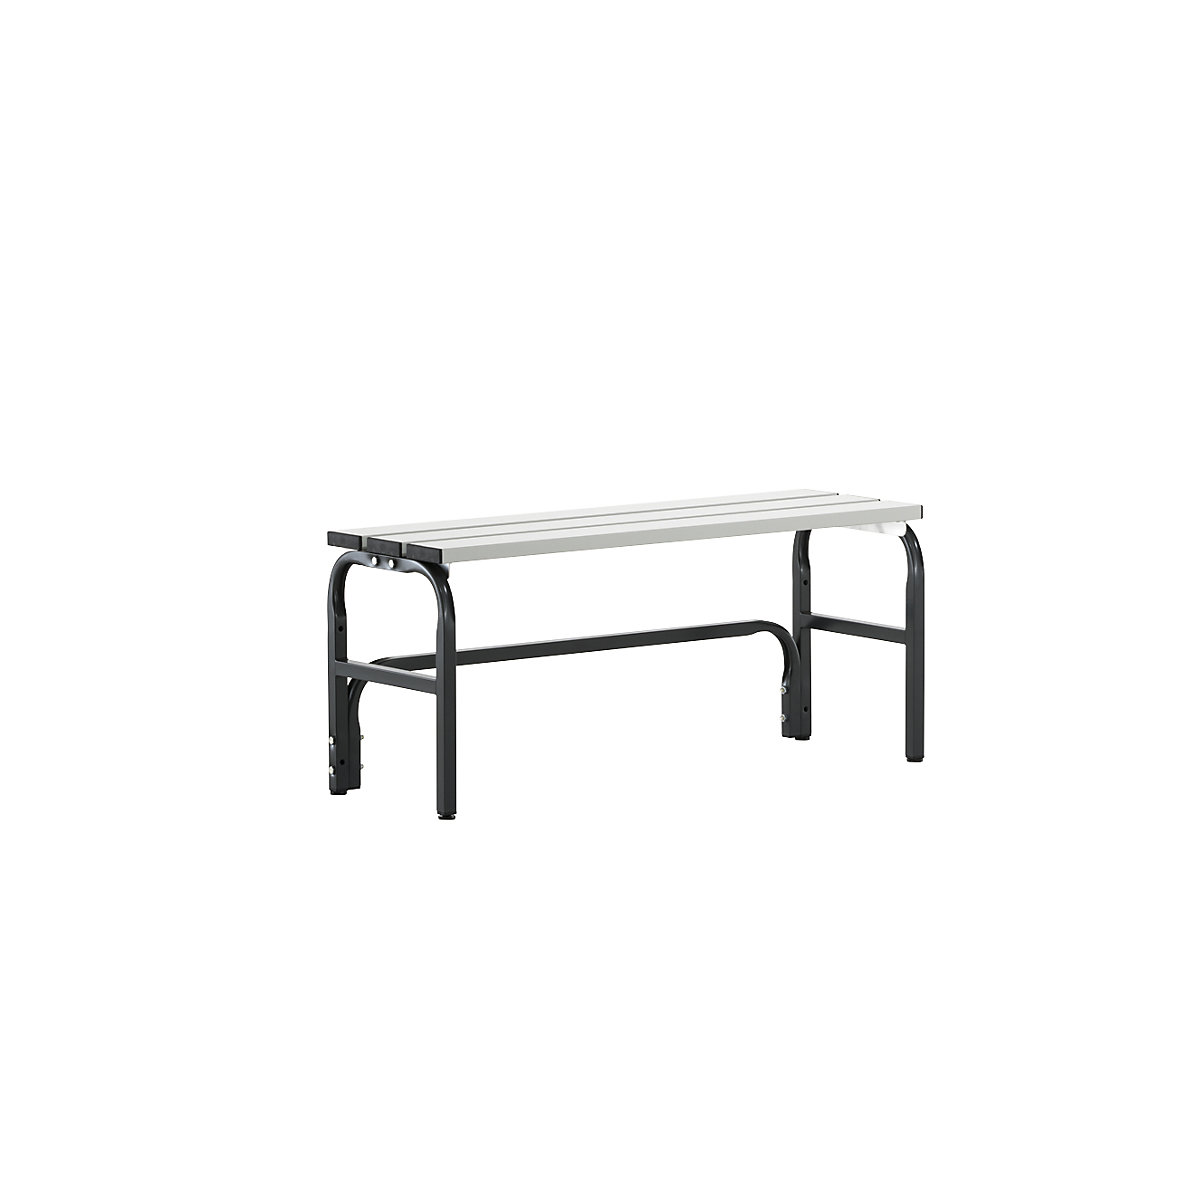 Changing room bench made of stainless steel - Sypro